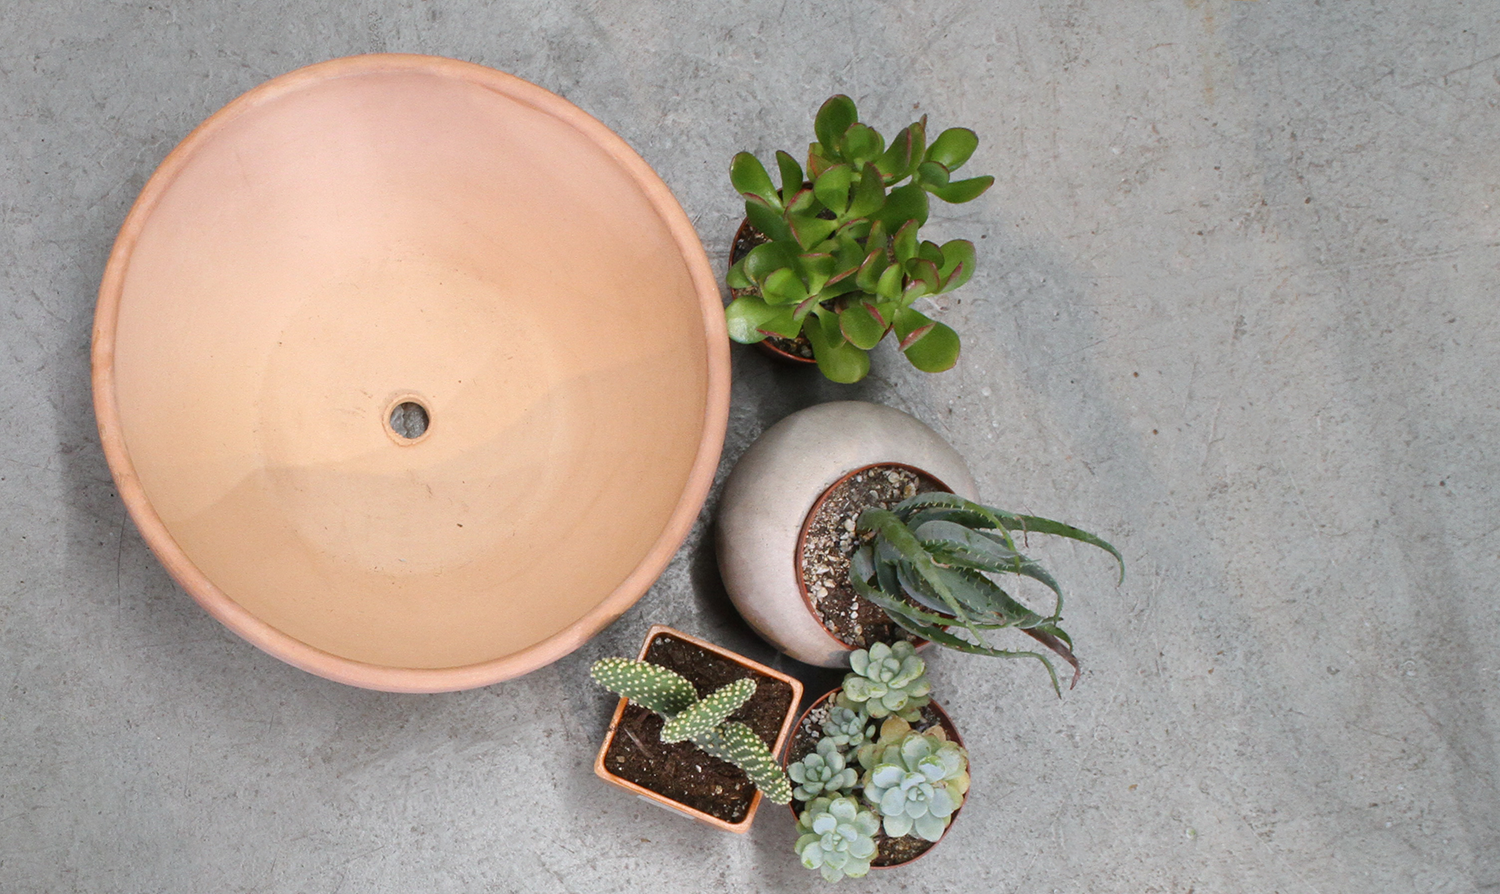 How To Plant Succulents In Small Pots